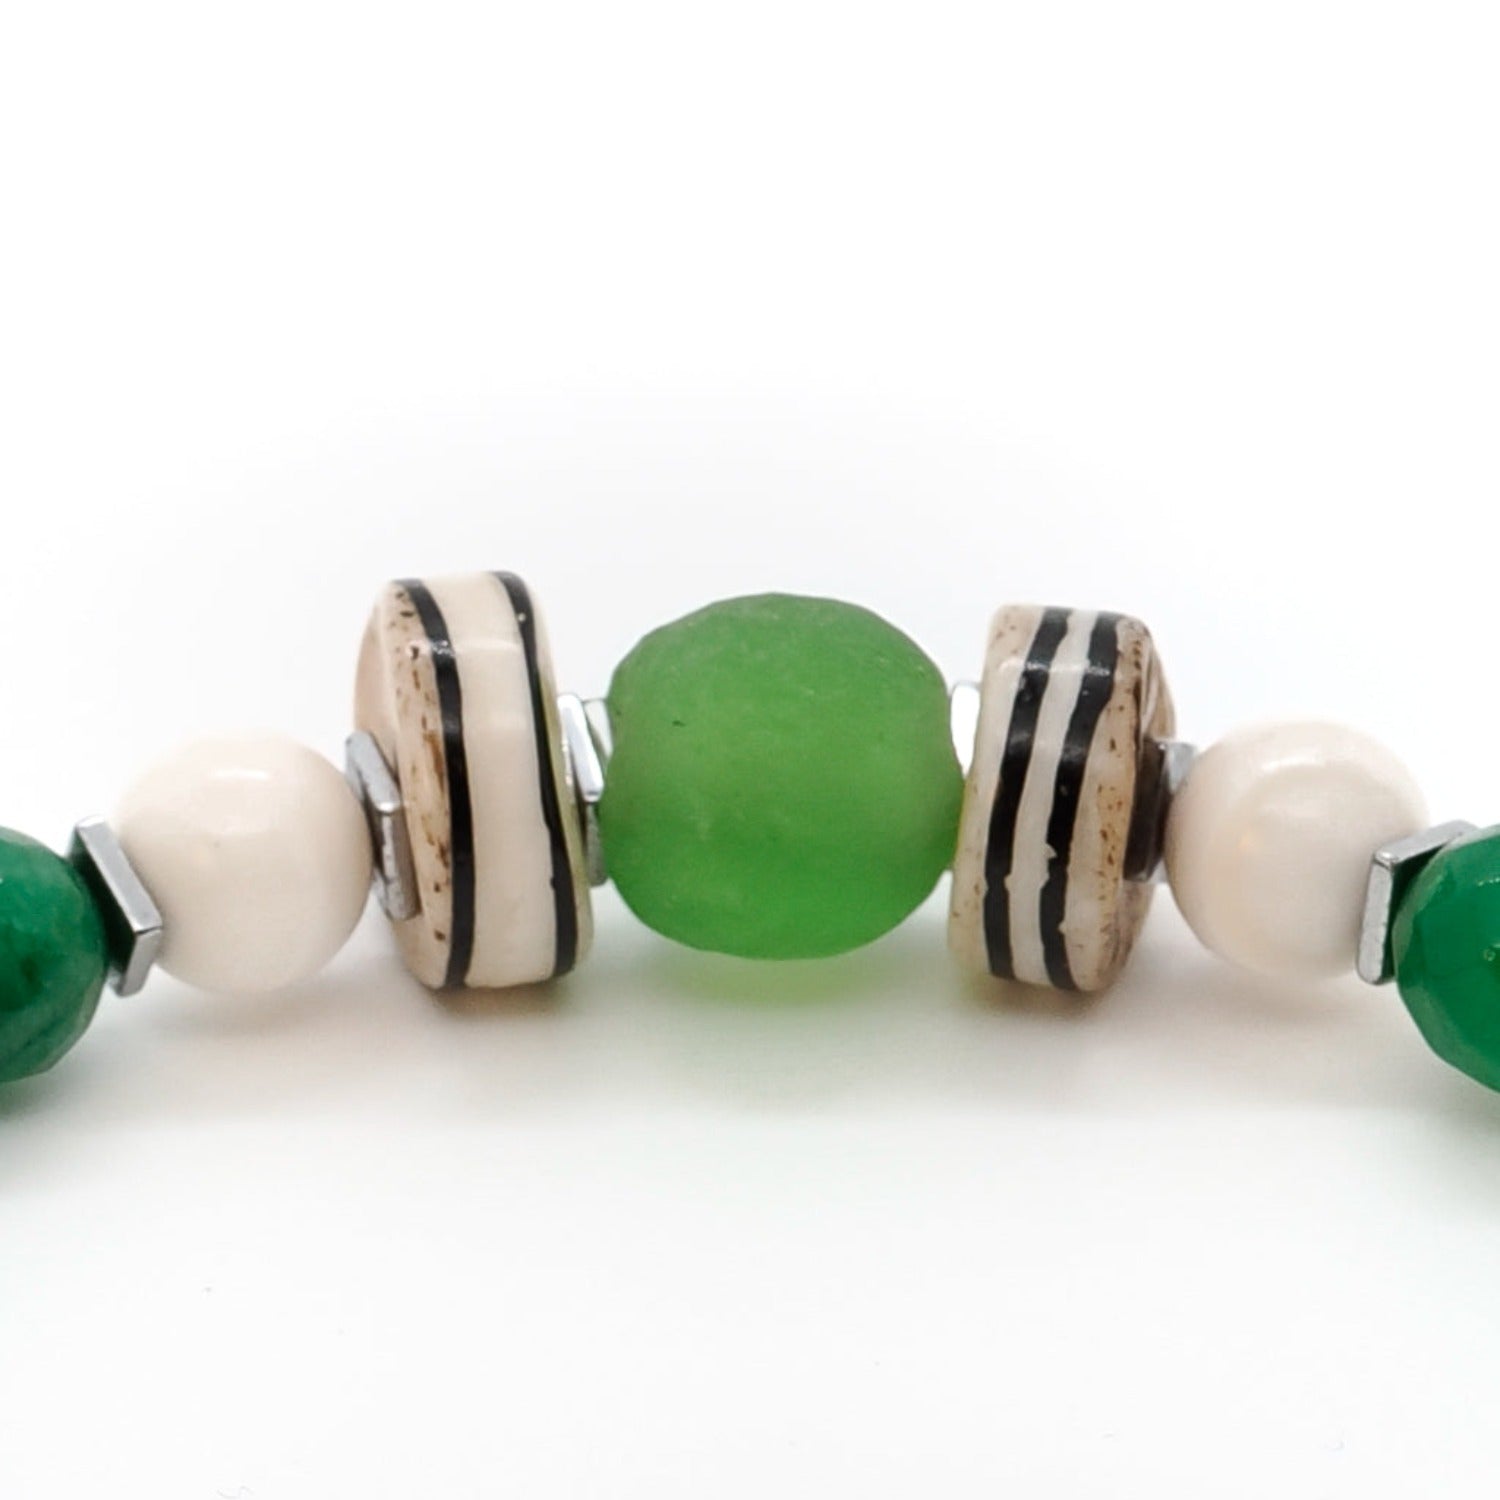 Handcrafted Green Buddha Bracelet showcasing meticulous attention to detail, featuring Nepal striped meditation beads and a captivating combination of Green Jade stone beads, White Nepal stone beads, and a silver color Hematite stone Buddha bead.